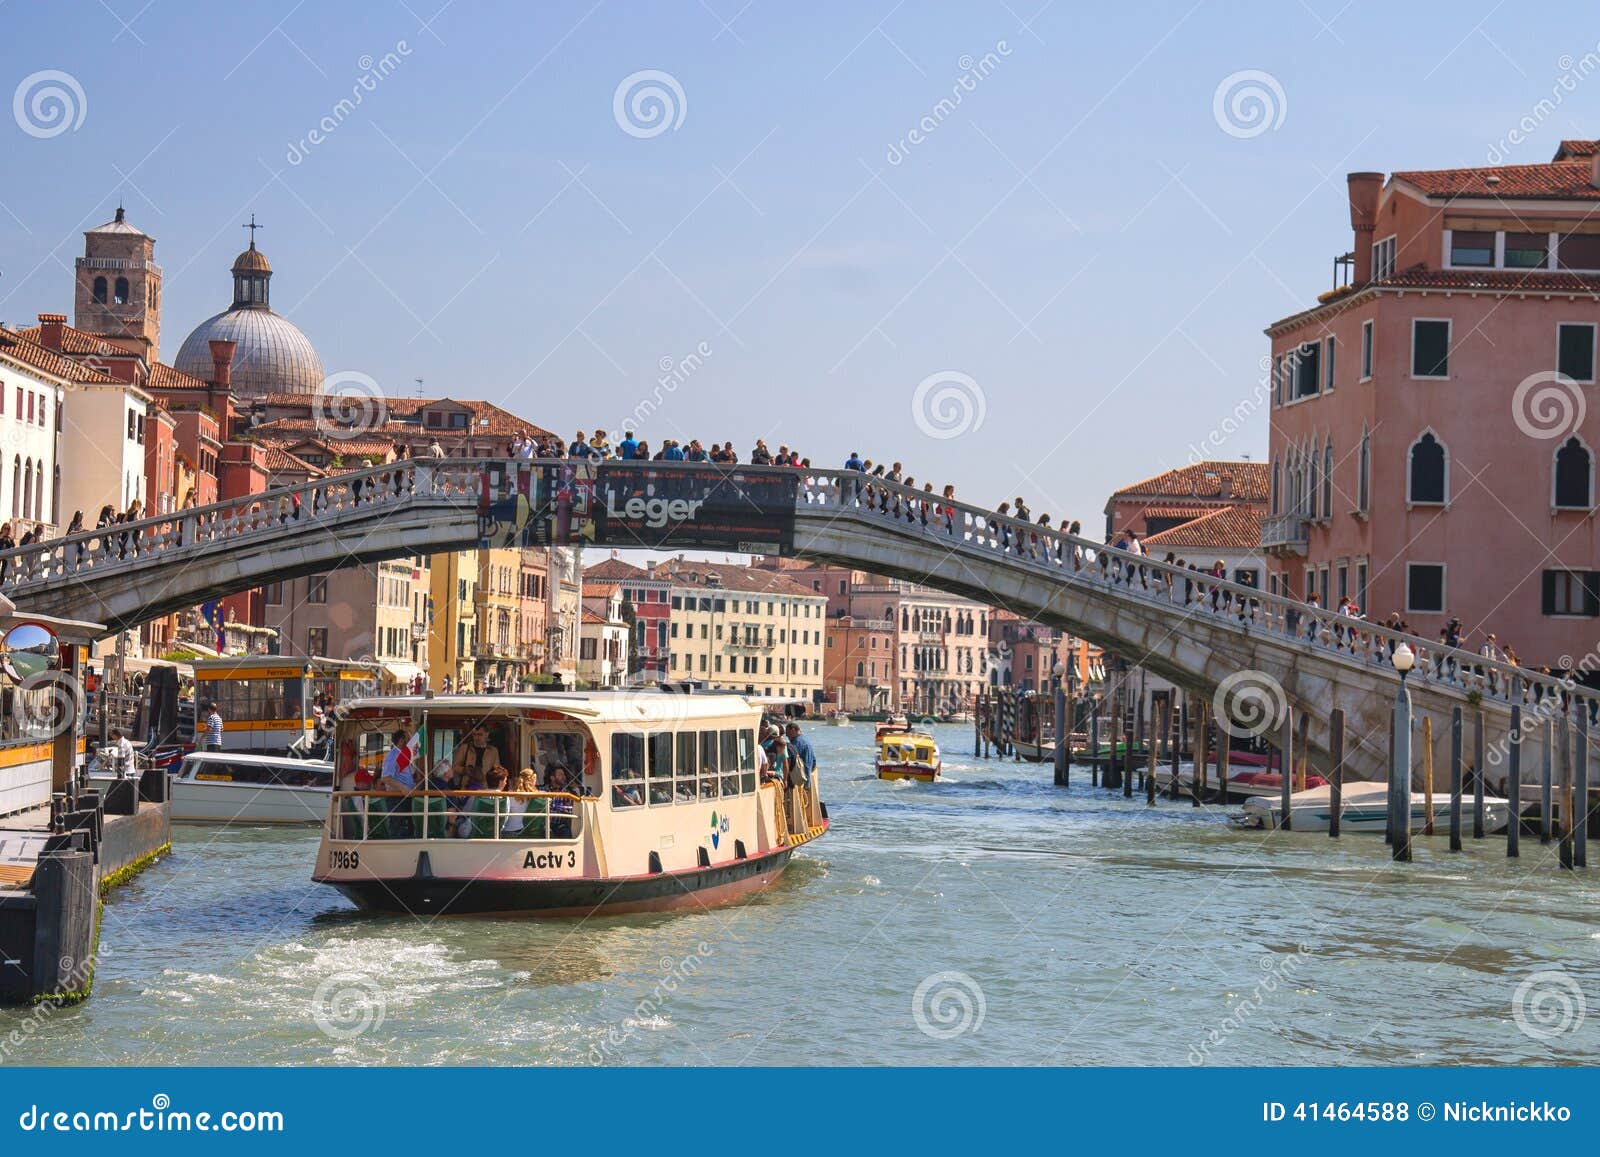 Active Movement On A Canal In Sunny Spring Day,Venice ...